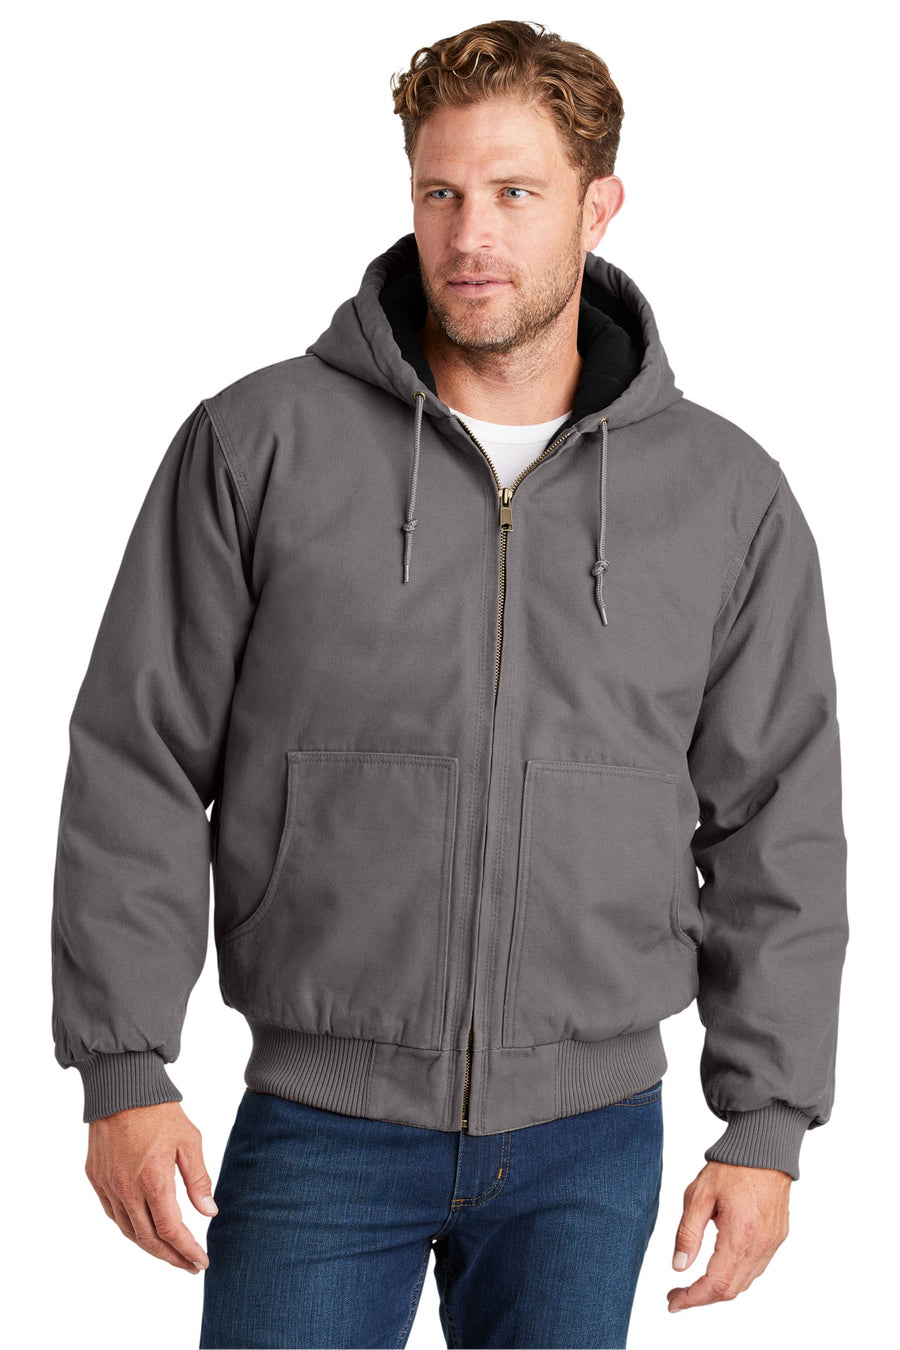 CornerStone Washed Duck Cloth Insulated Hooded Work Jacket.